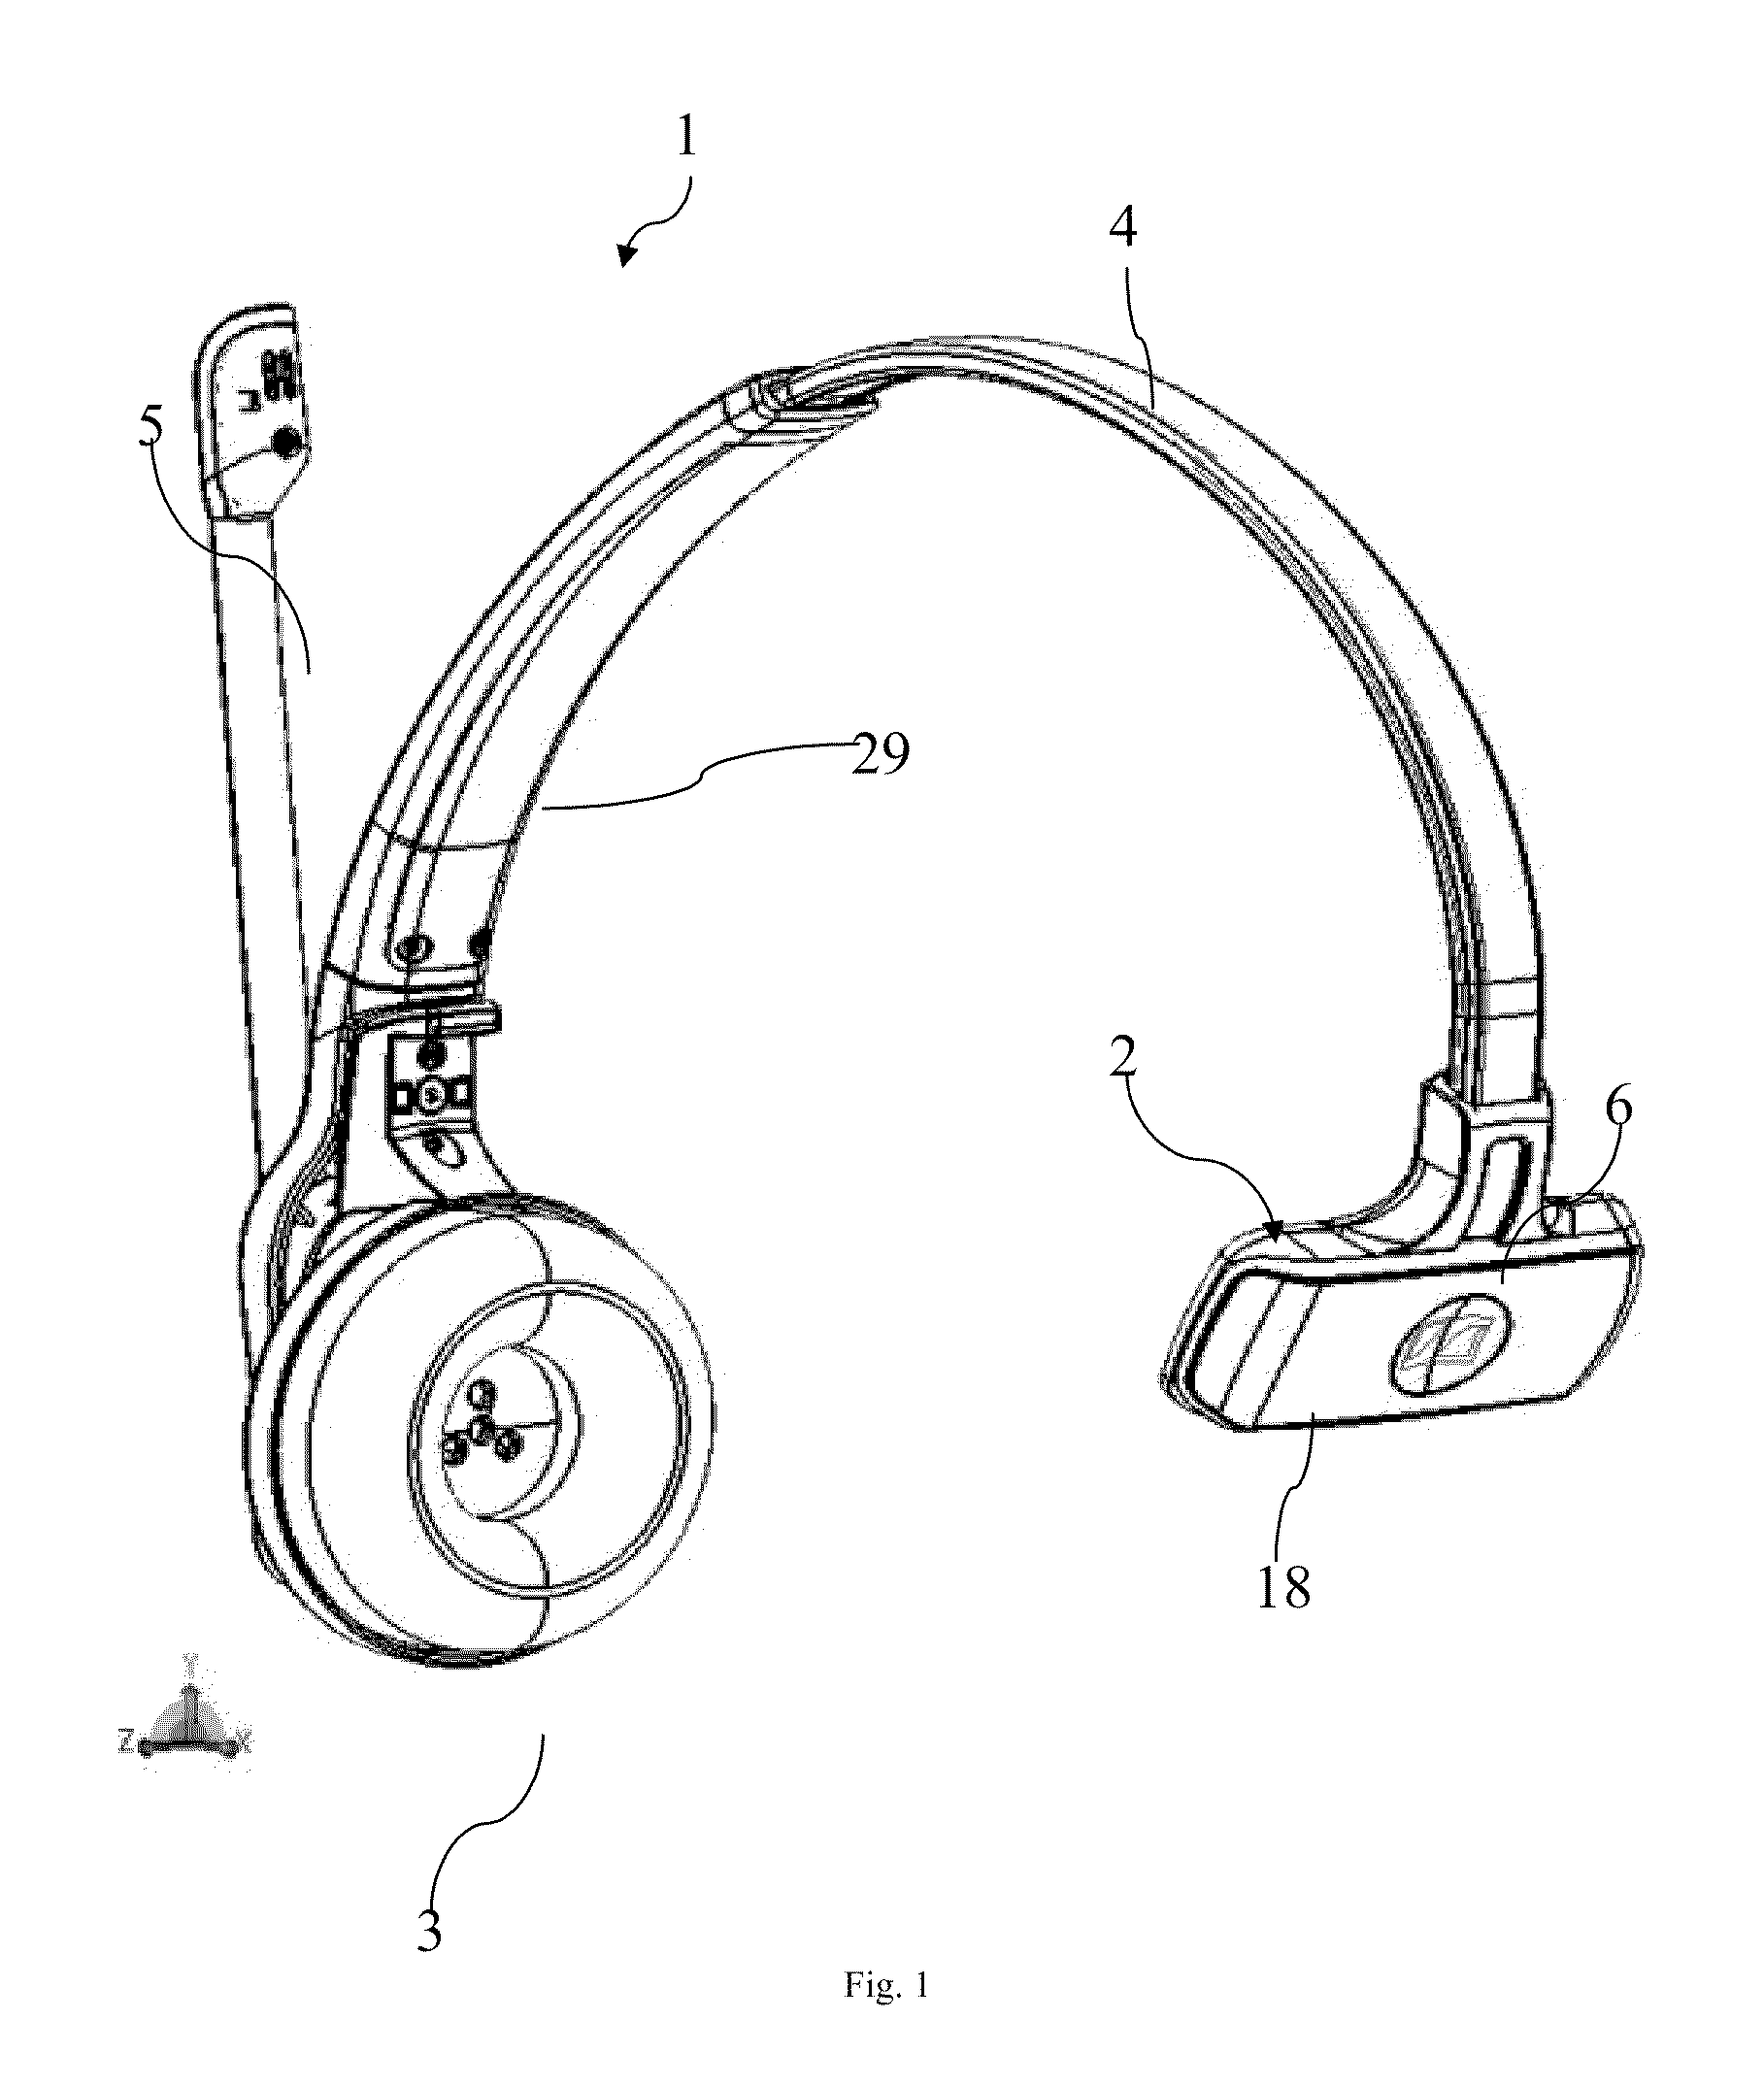 Headset with side support